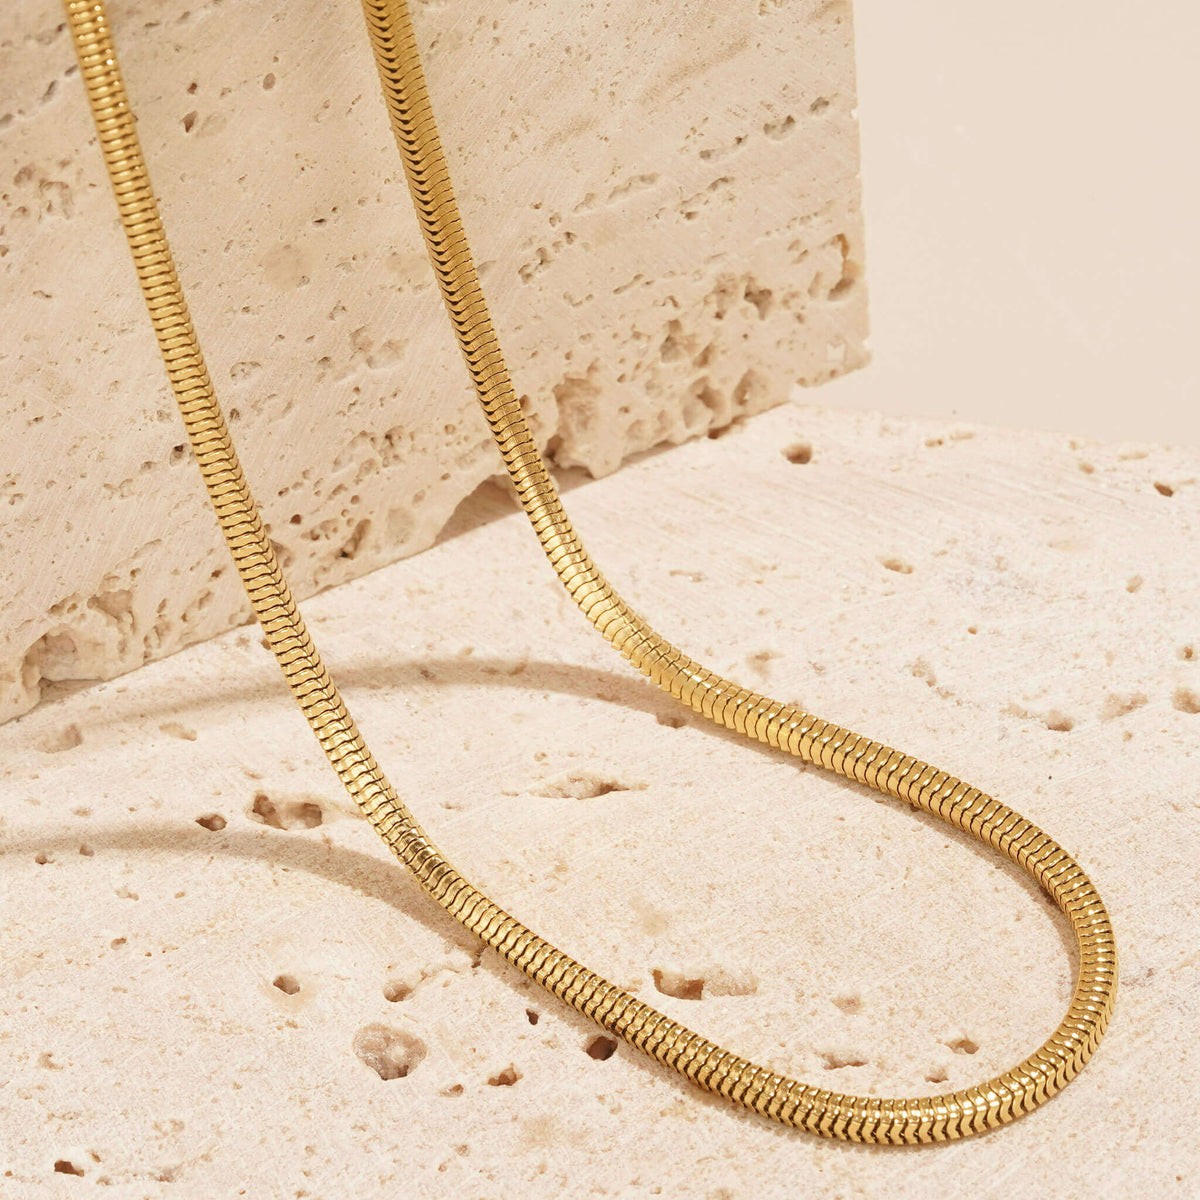 textured herringbone snake chain in gold plating available to shop at Mettle & Bloom